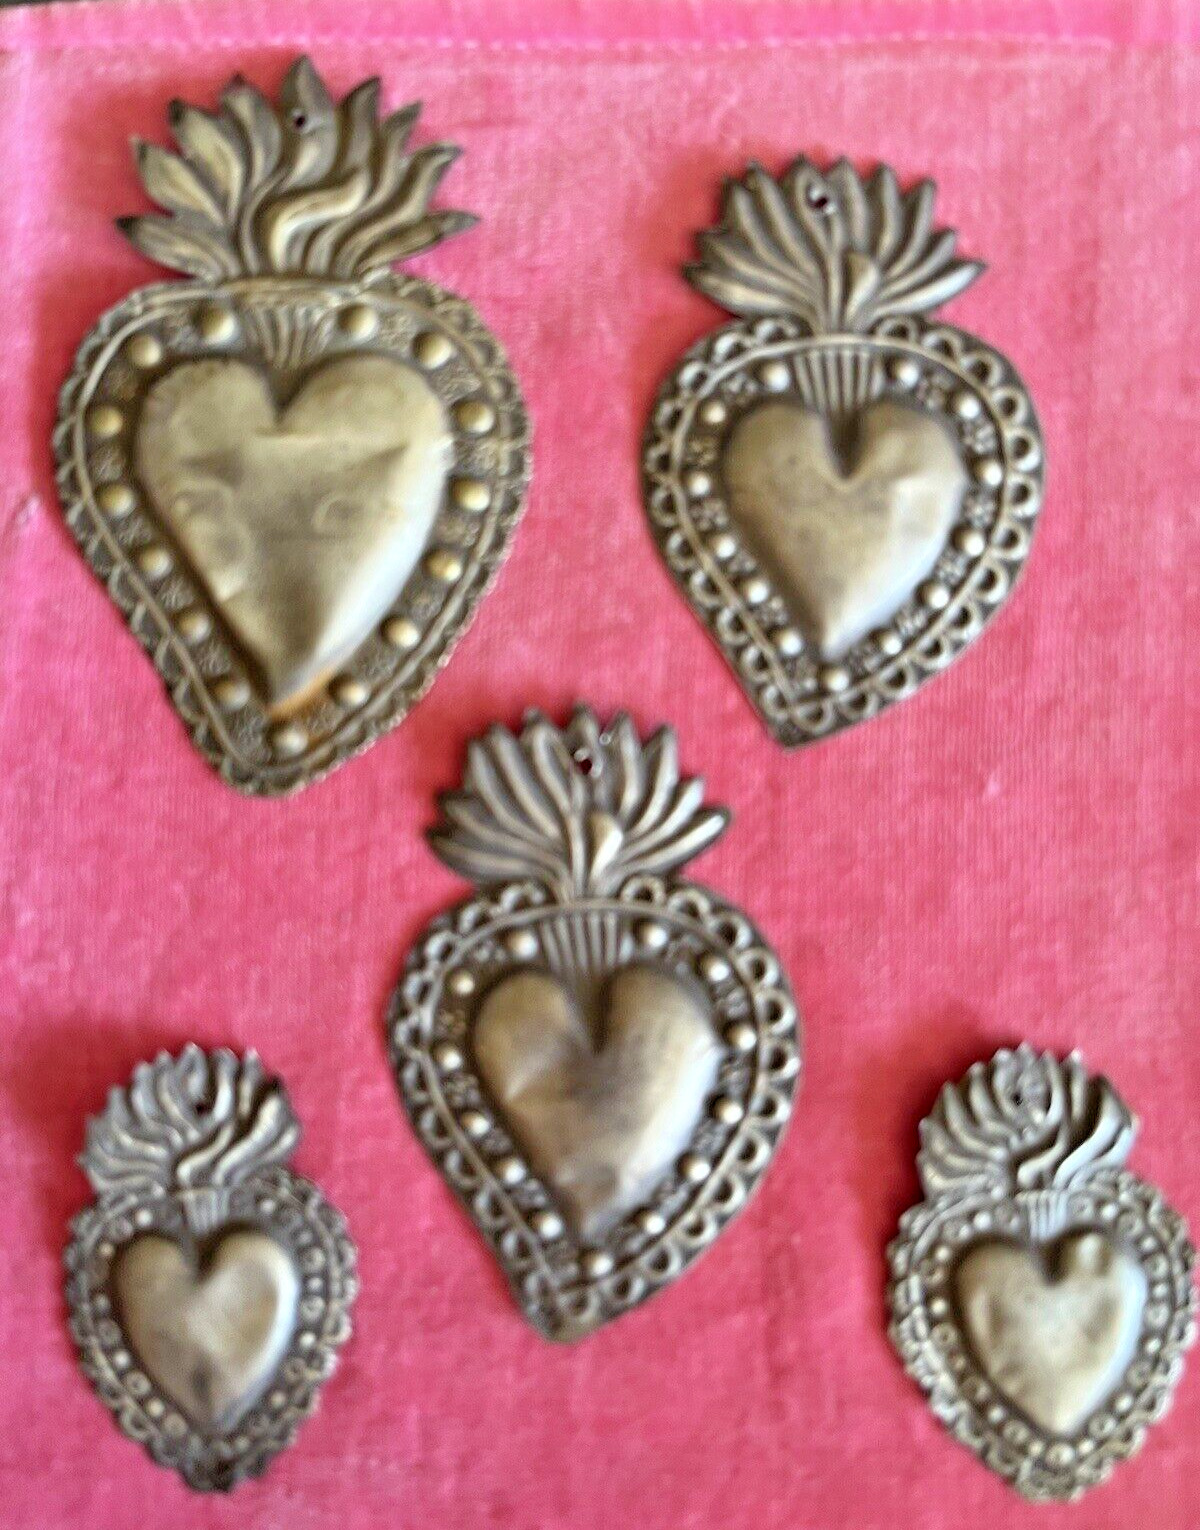 5 (FIVE) ANTIQUE SILVER SACRED HEART RELIGIOUS MEDALLIONS, SUPER THIN,GORGEOUS